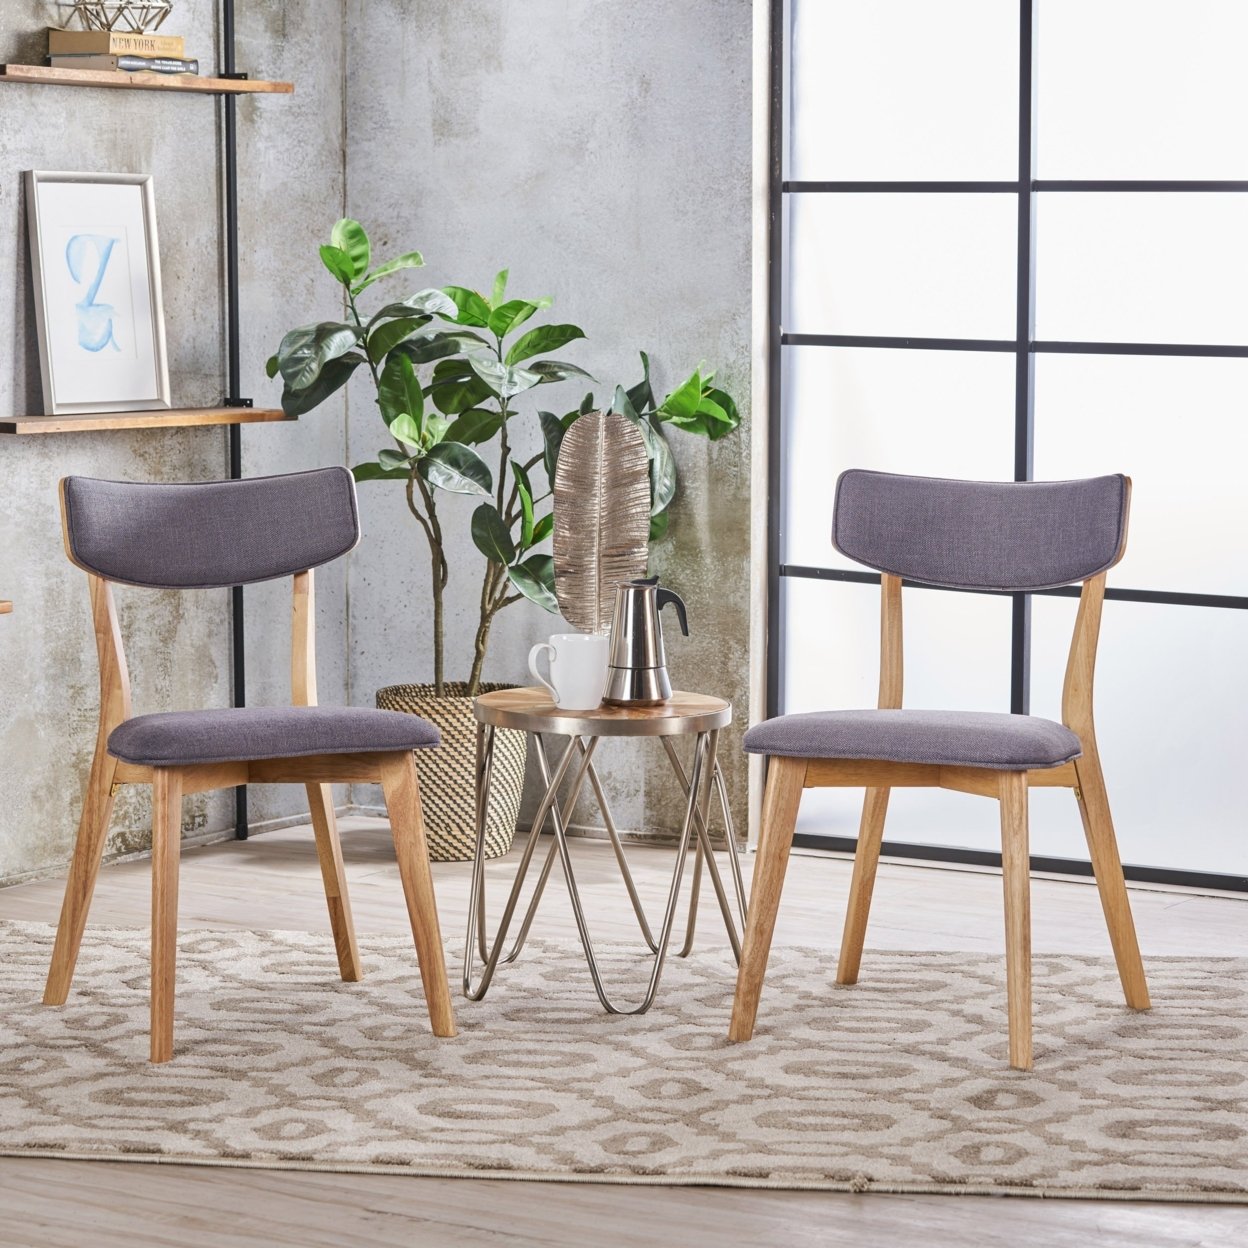 Caleb Mid Century Fabric Dining Chairs With Natural Oak Finish(Set Of 2) - Light Beige